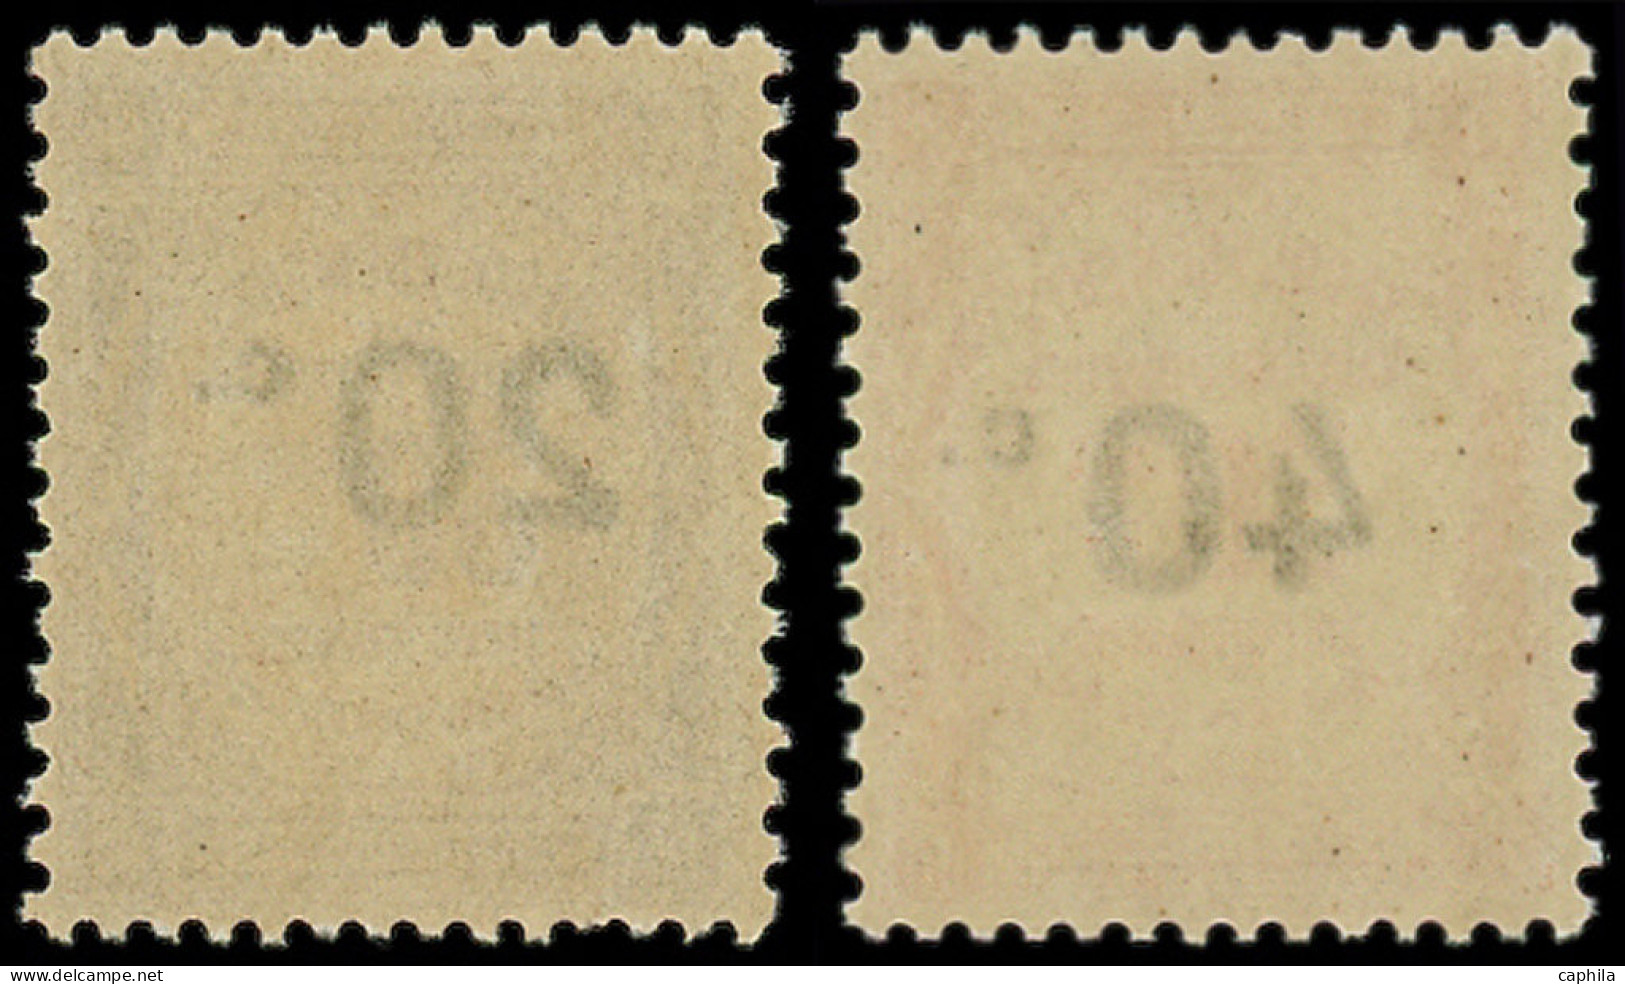 ** FRANCE - Taxe - 49/50: Recouvrements - 1859-1959 Neufs